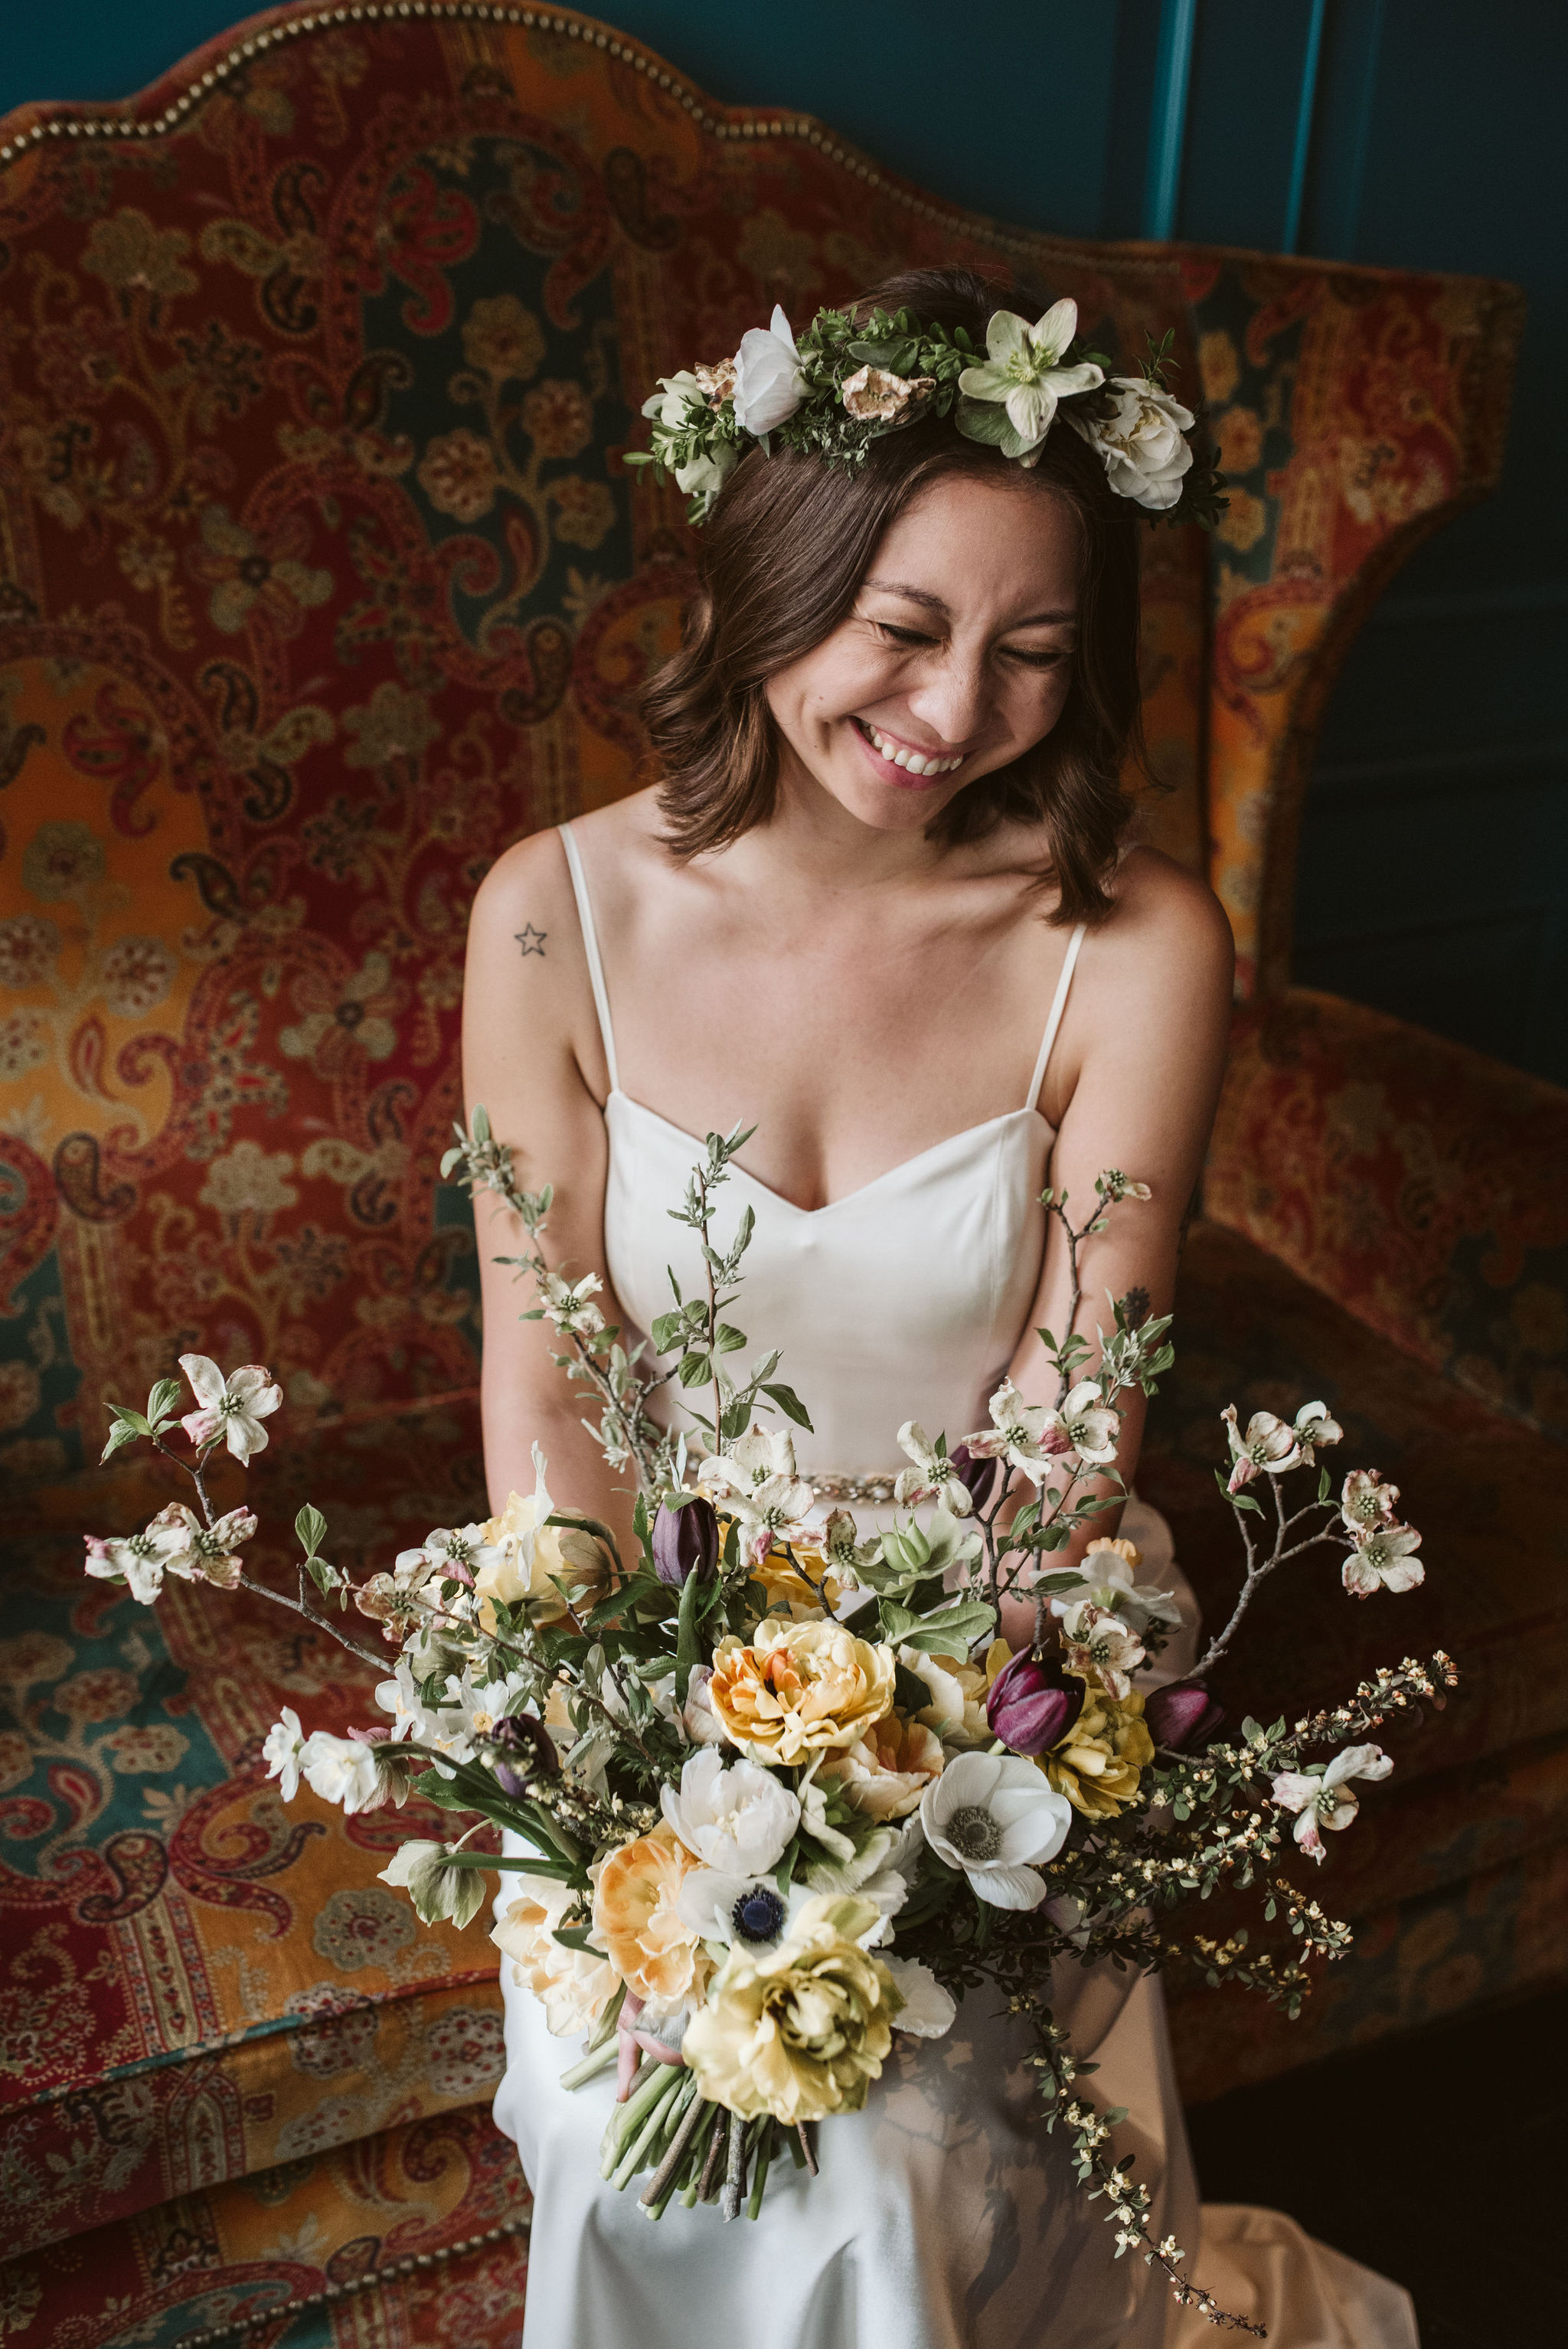  Washington DC, Baltimore Wedding Photographer, Alexandria, Old Town, Jewel Tone, Romantic, Modern, The Alexandrian Autograph Collection Hotel, Bride smiling and laughing, Sungold Flower Co 